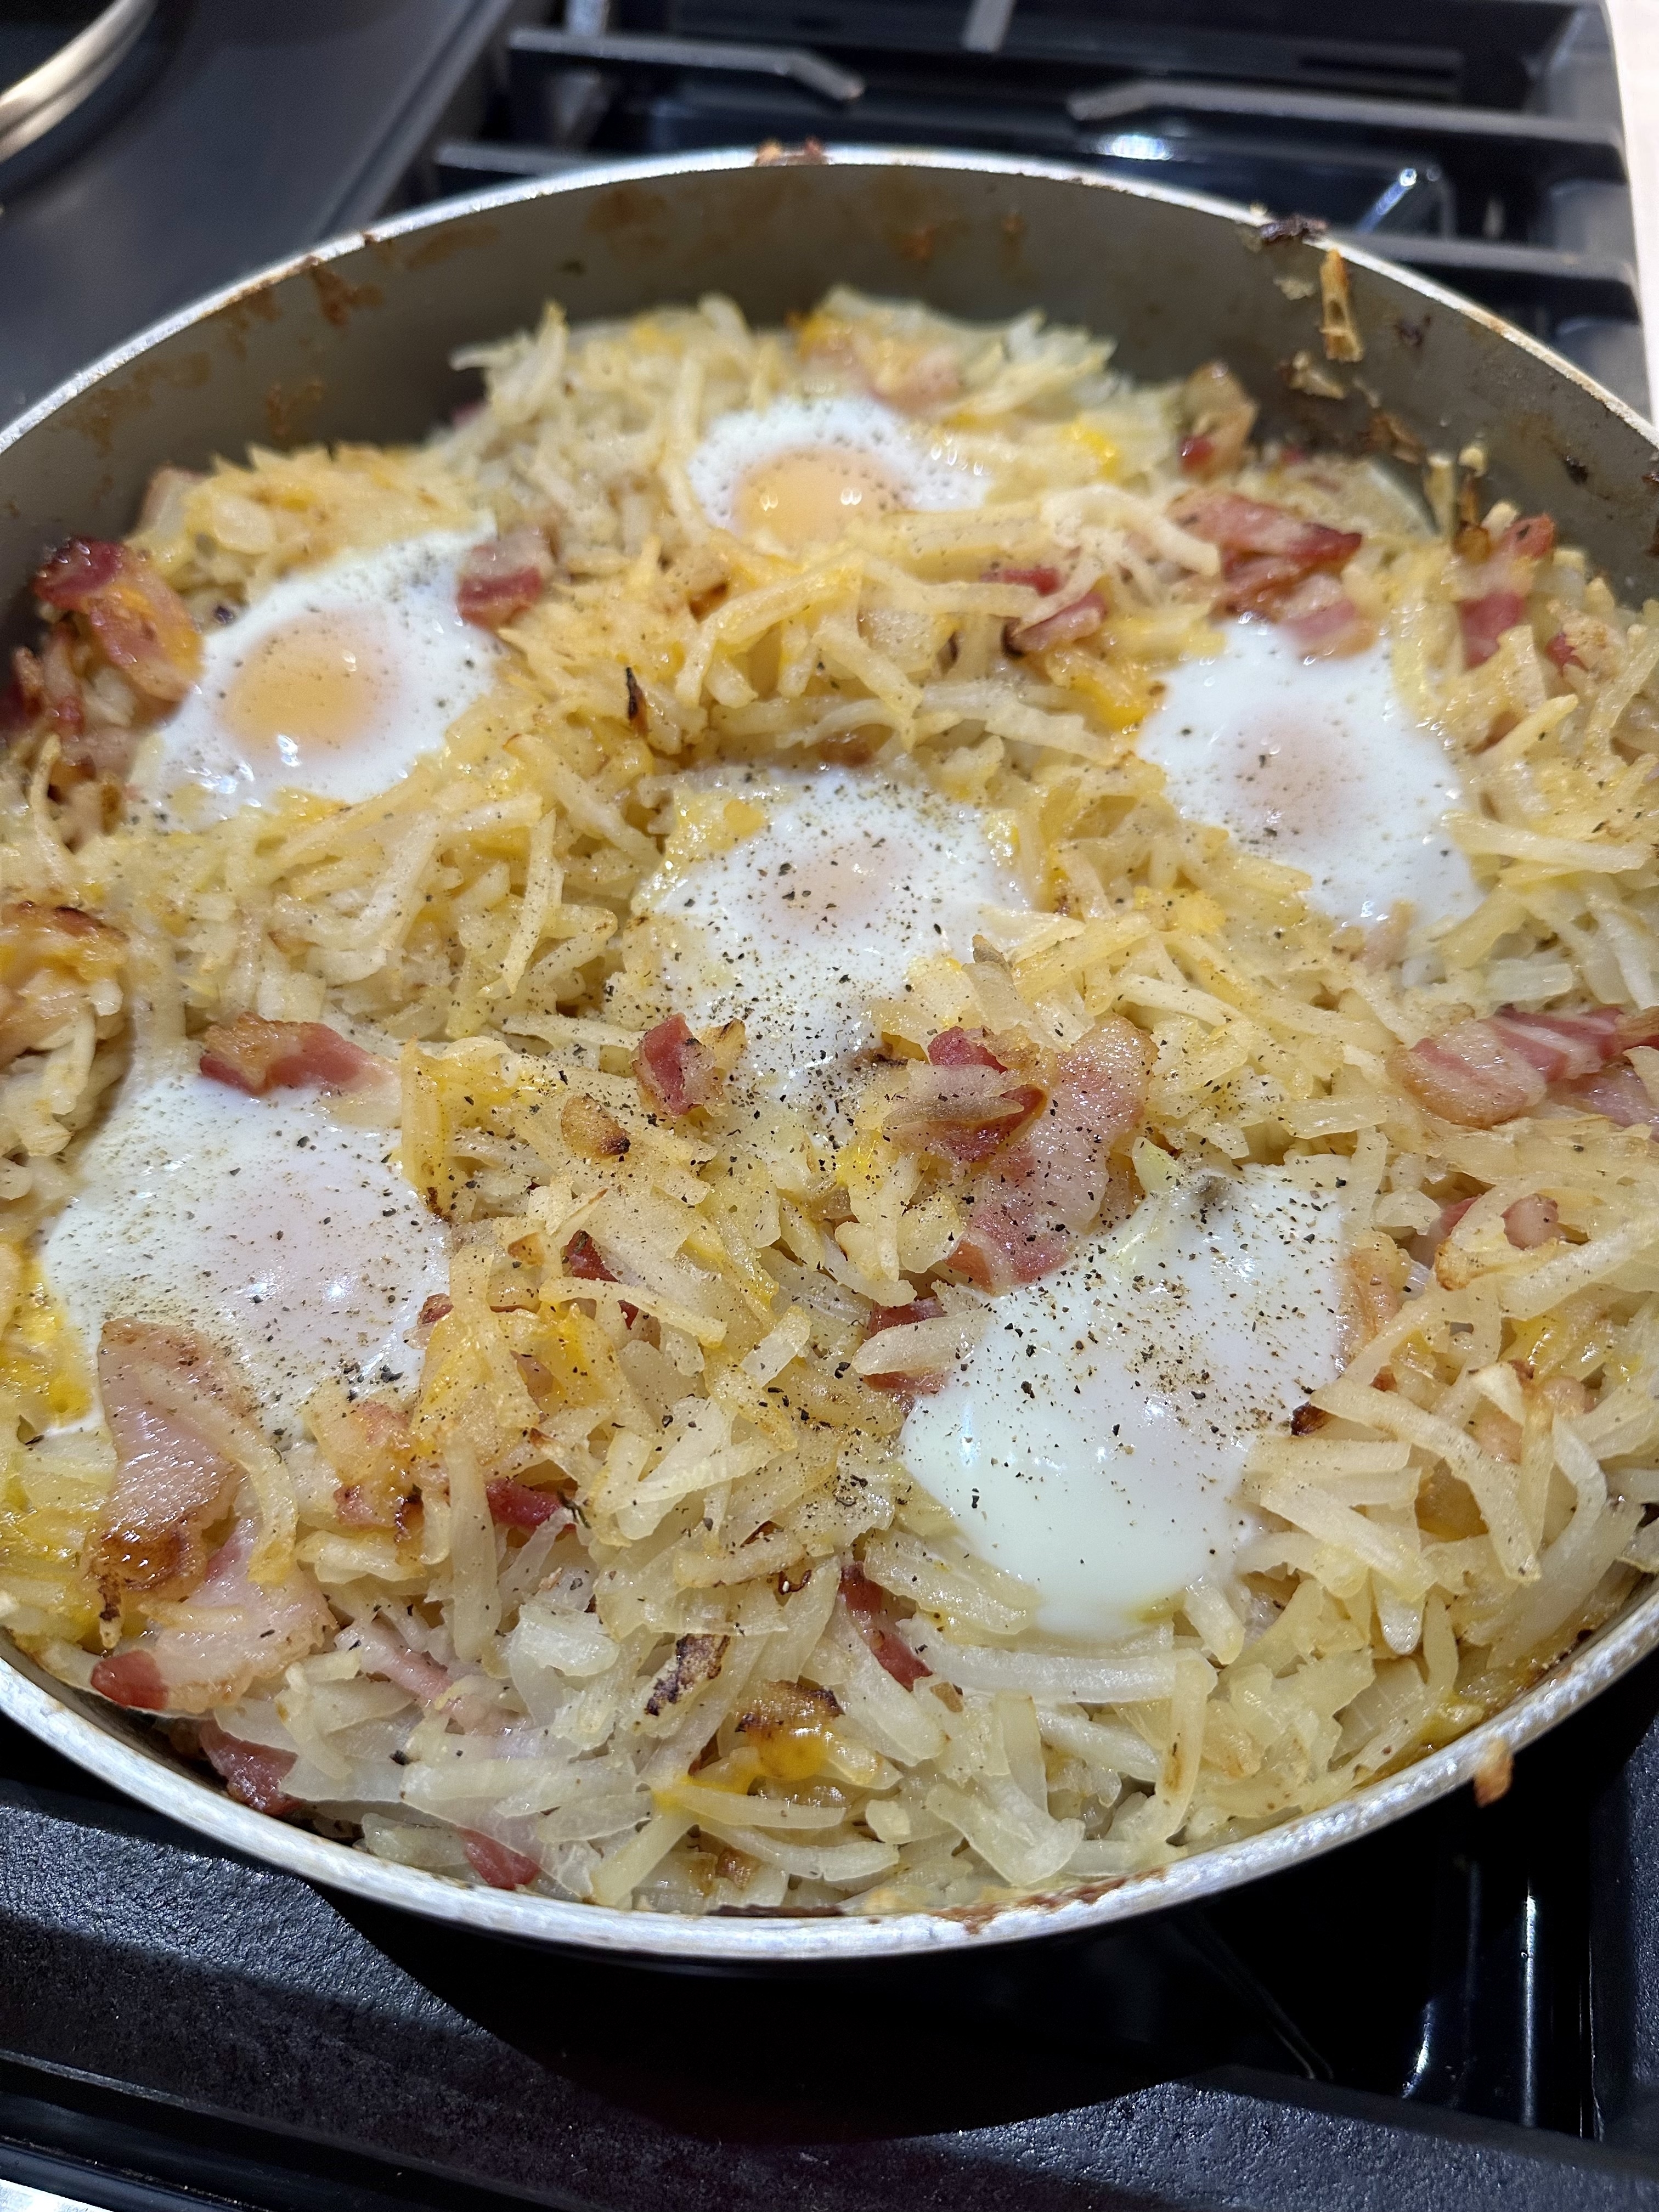 hashbrown, eggs, bacon, and cheese in a skillet